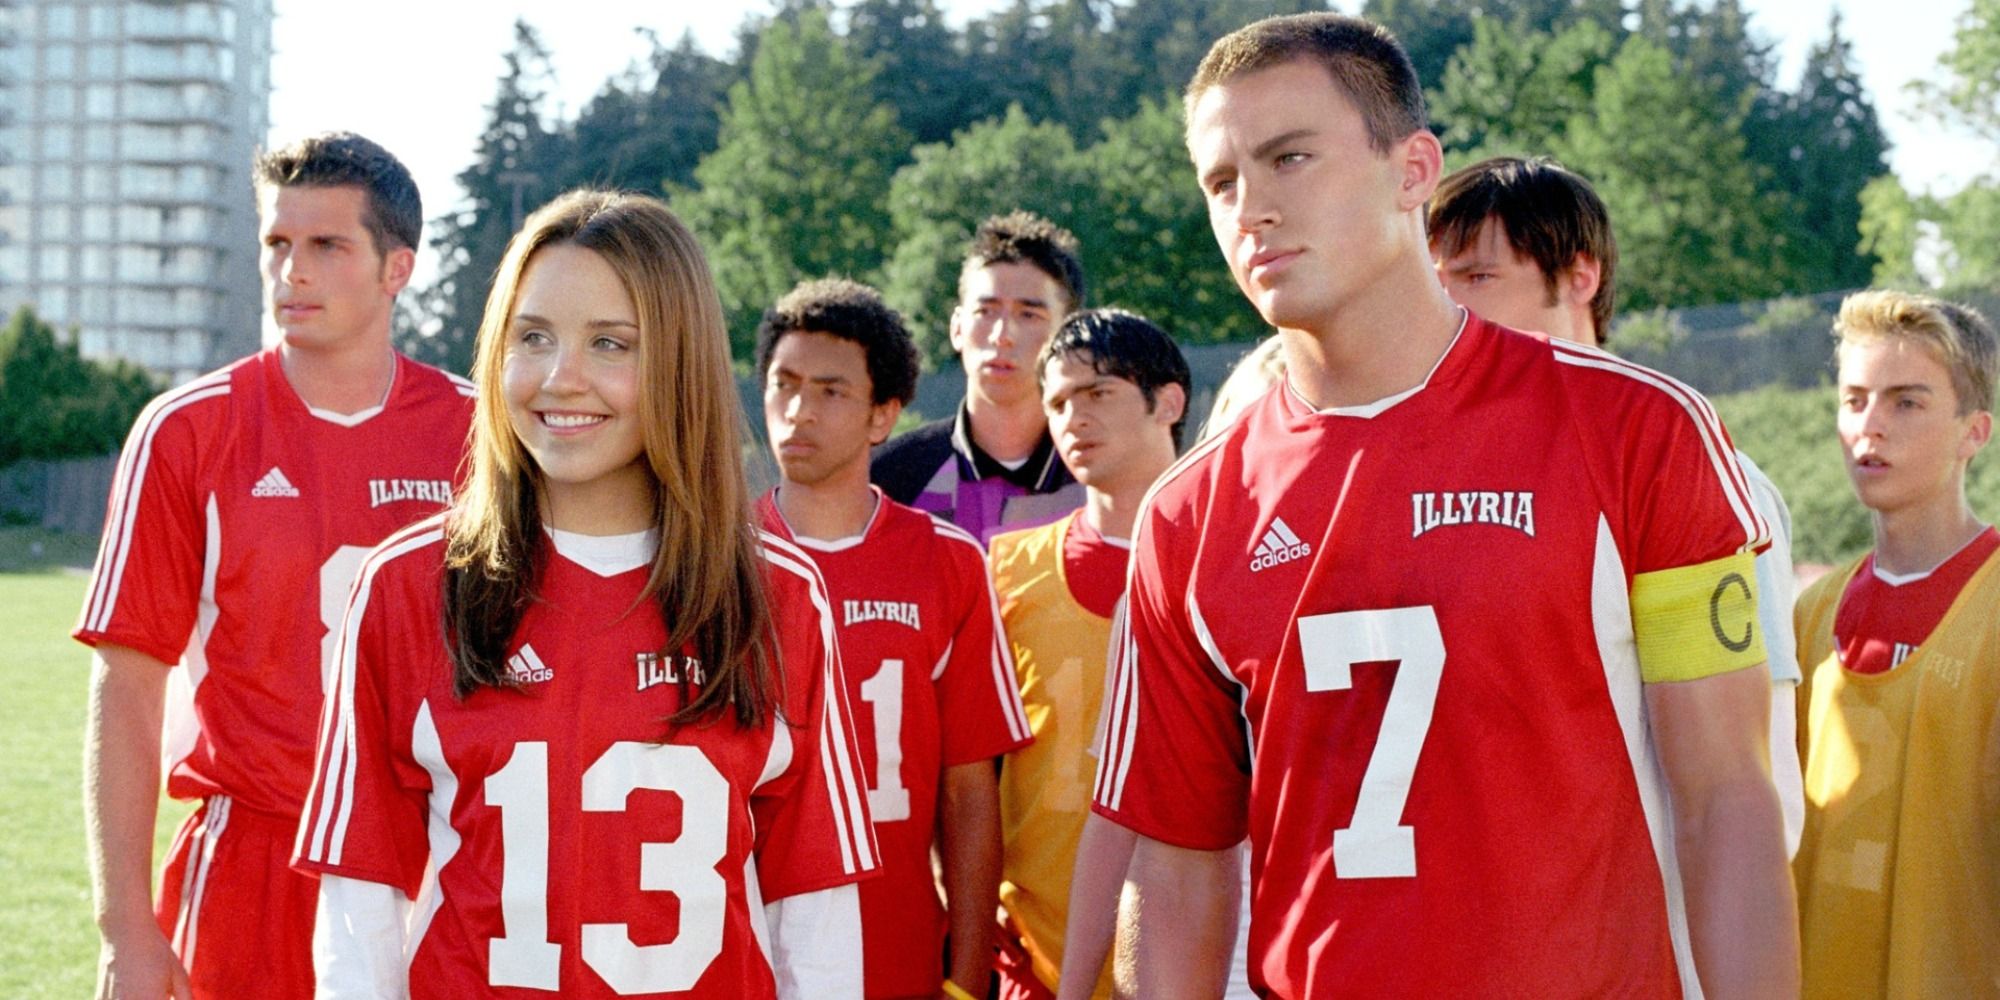 Amanda Bynes and Channing Tatum in soccer jerseys on the field